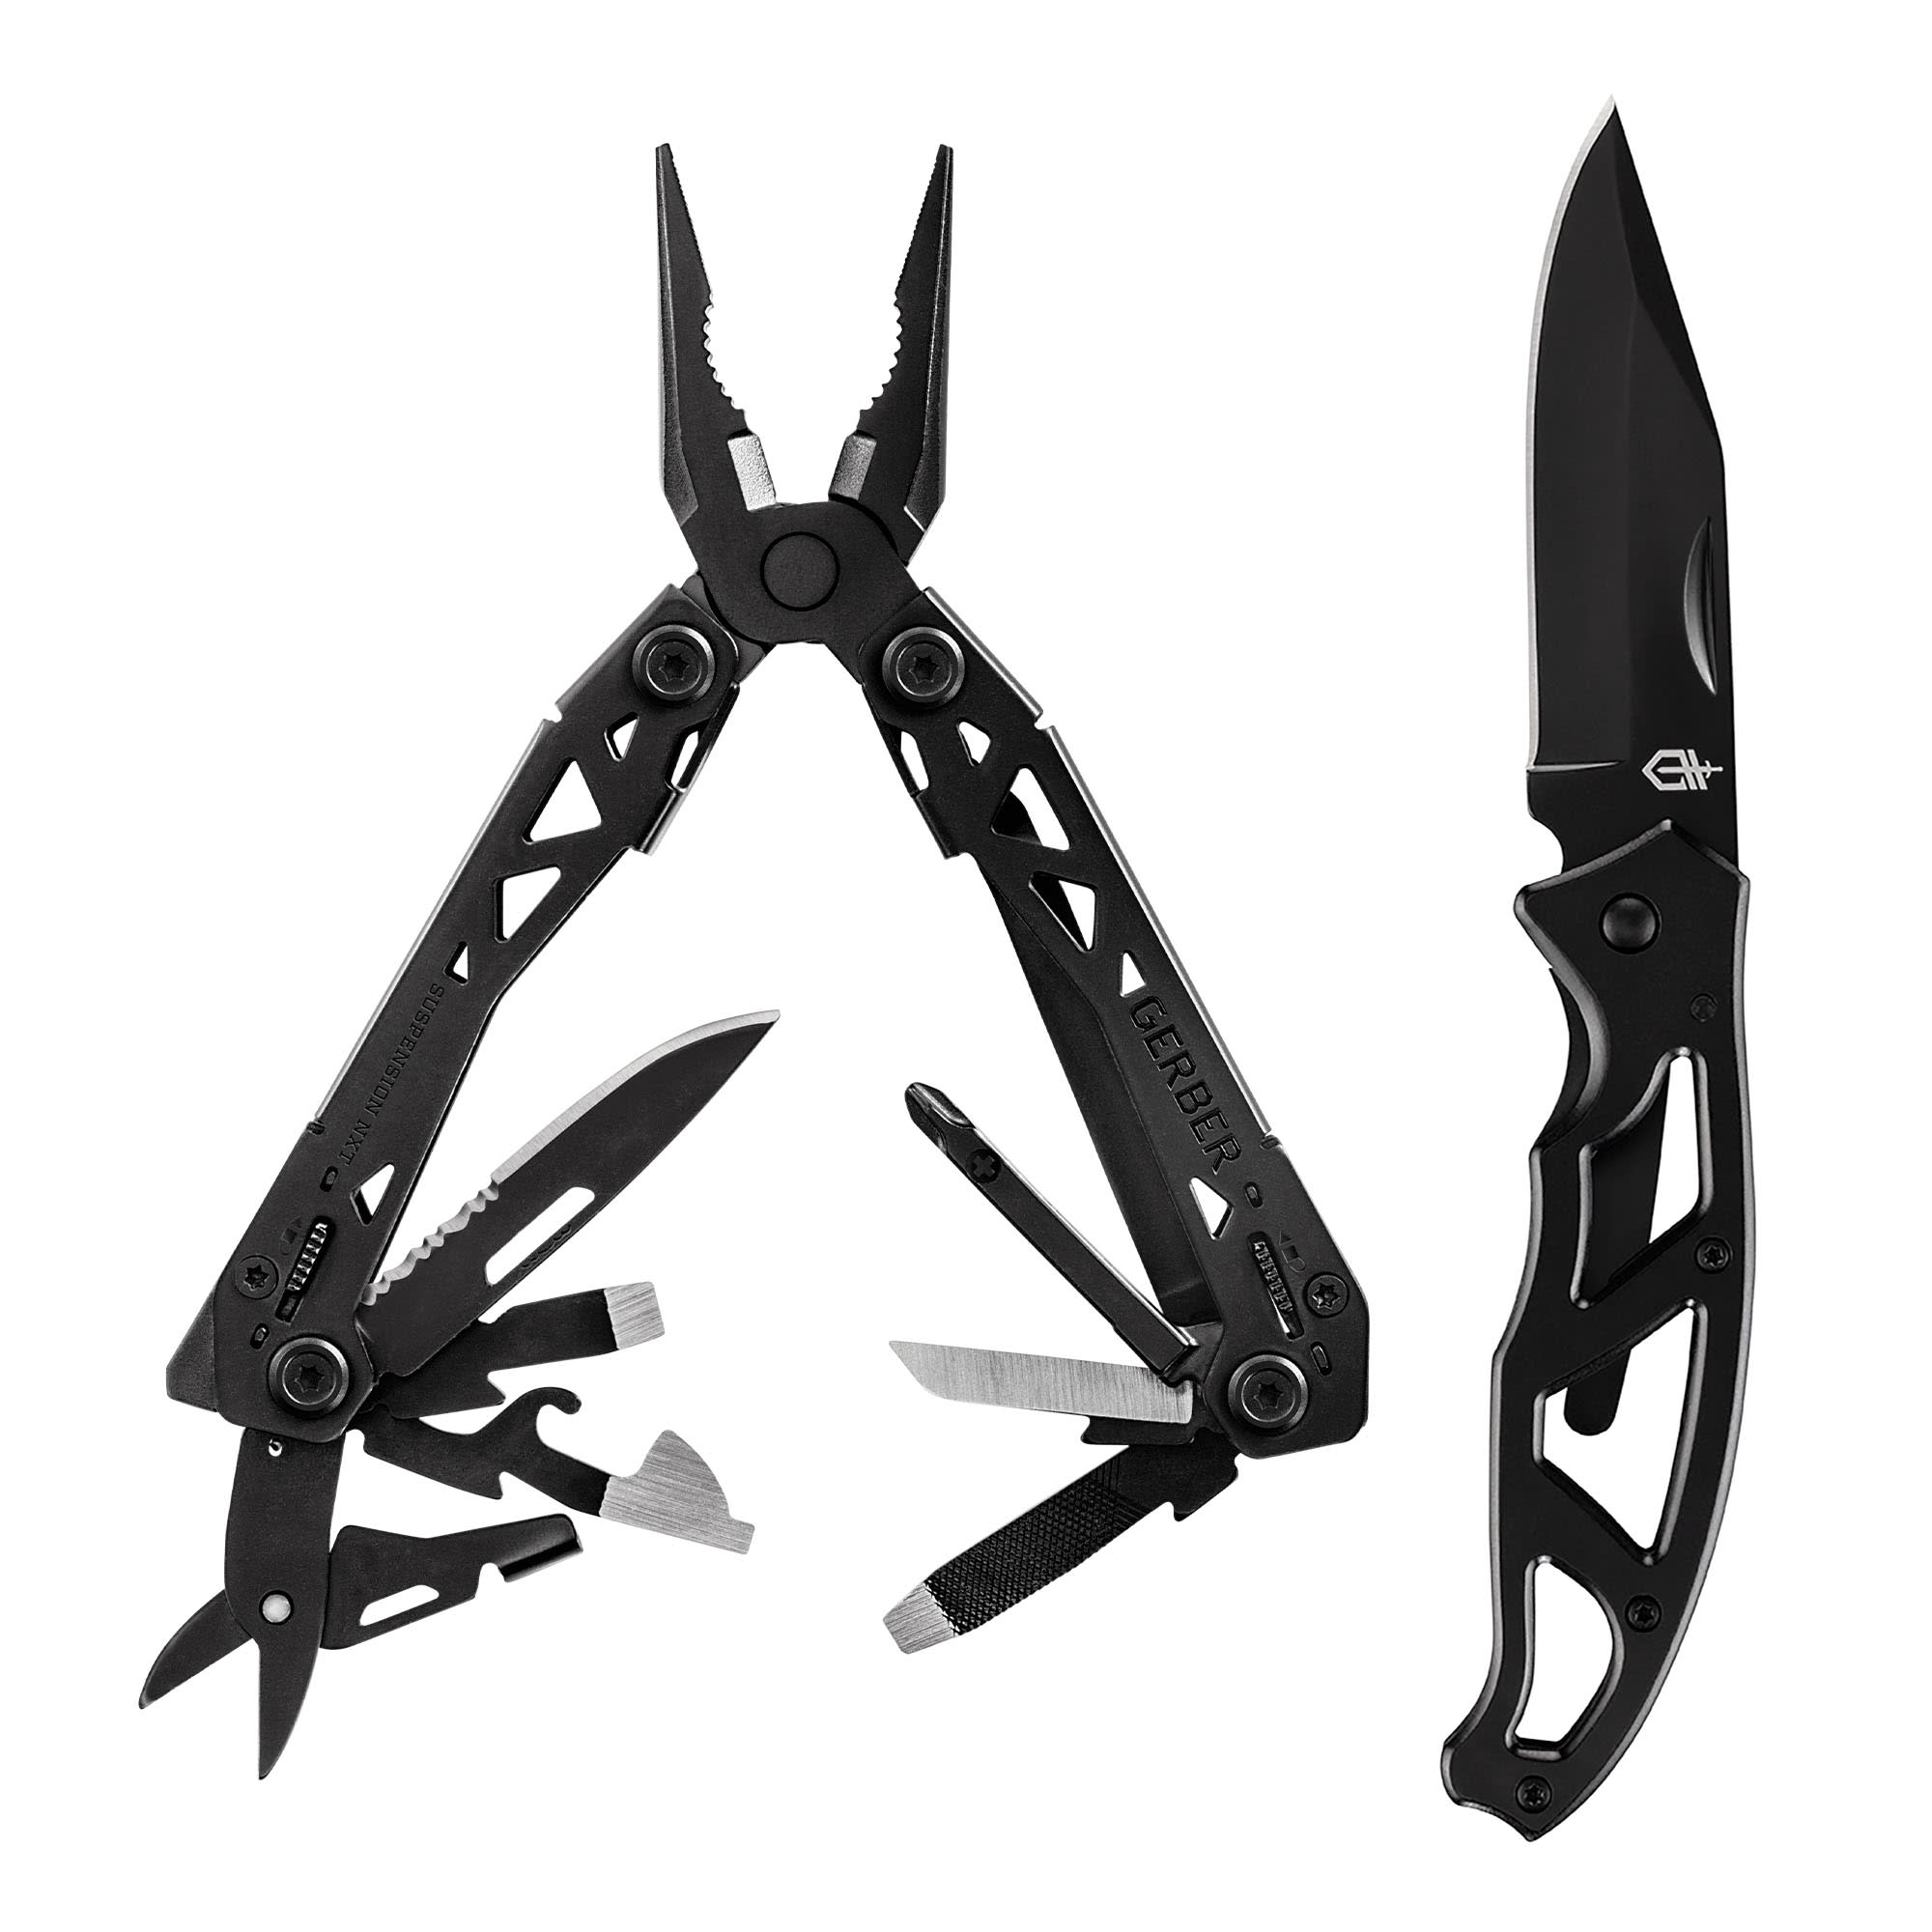 Gerber® Suspension NXT Folding Knife and Paraframe Multi-tool